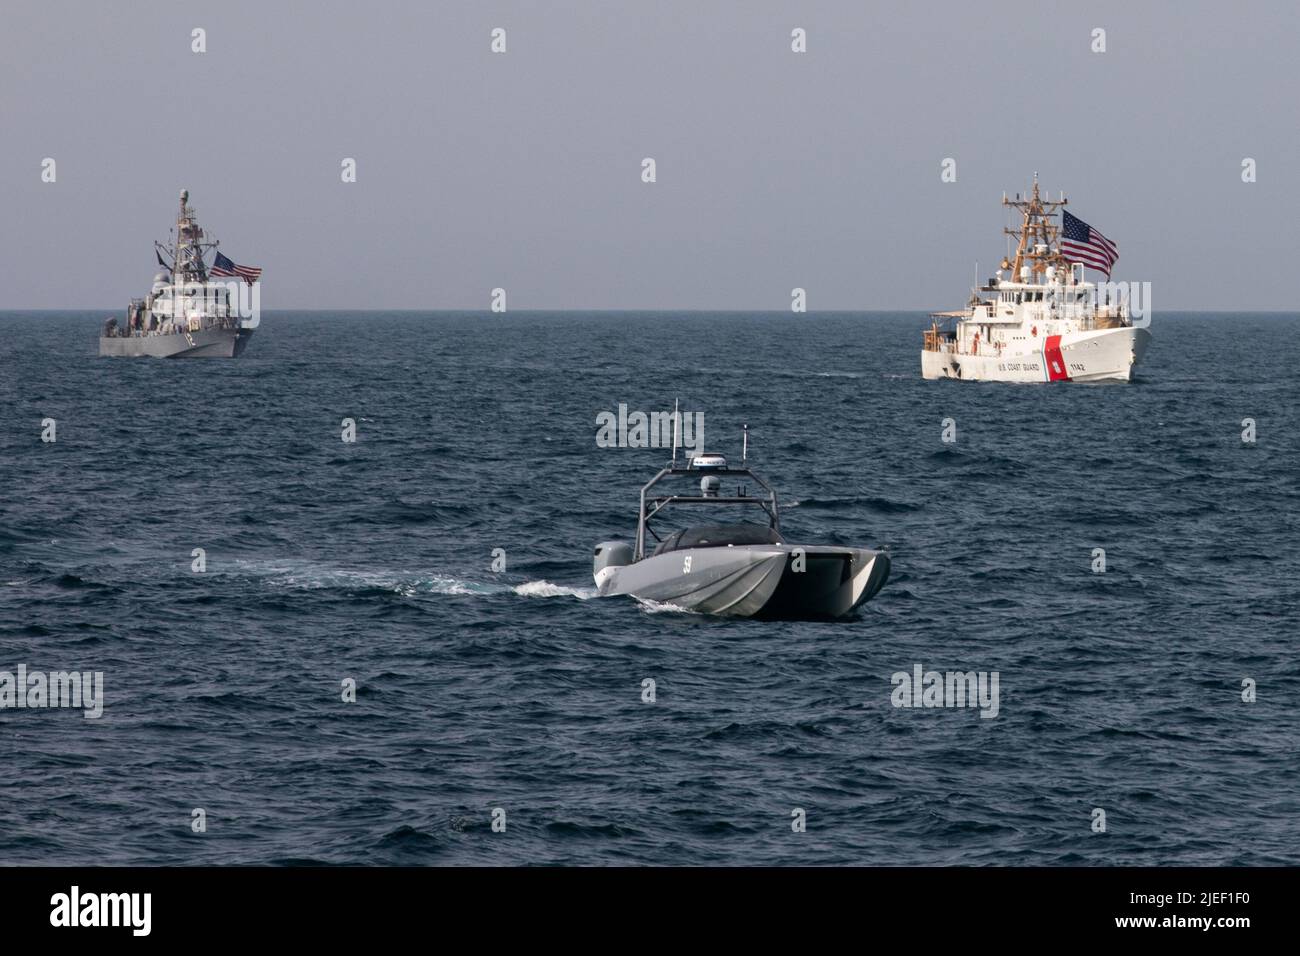 220626-A-JJ498-1224 ARABIAN GULF (June 26, 2022) A Devil Ray T-38 unmanned surface vessel, U.S. Coast Guard cutter USCGC Robert Goldman (WPC 1142), and coastal patrol ship USS Thunderbolt (PC 12) sail in the Arabian Gulf, June 26. U.S. naval forces regularly operate across the Middle East region to help ensure security and stability. (U.S. Army photo by Spc. Ian Miller) Stock Photo